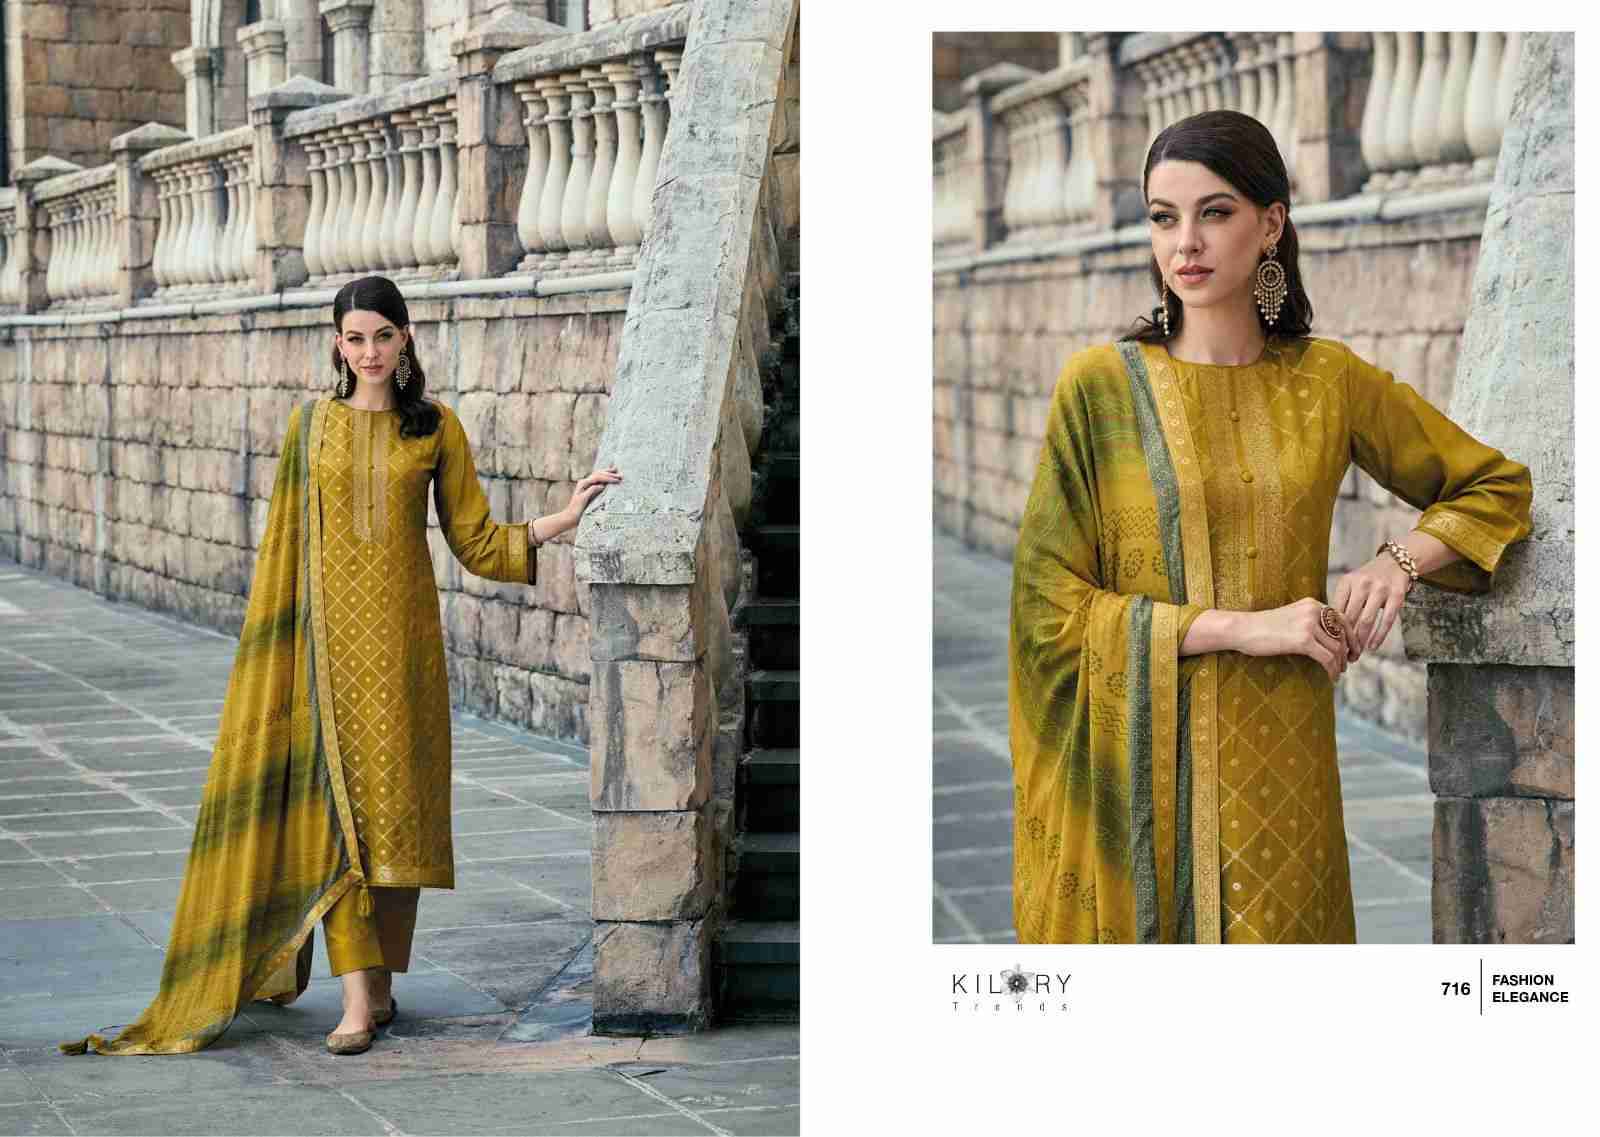 Haseen By Kilory 711 To 716 Series Beautiful Stylish Festive Suits Fancy Colorful Casual Wear & Ethnic Wear & Ready To Wear Pure Jacquard Silk Dresses At Wholesale Price